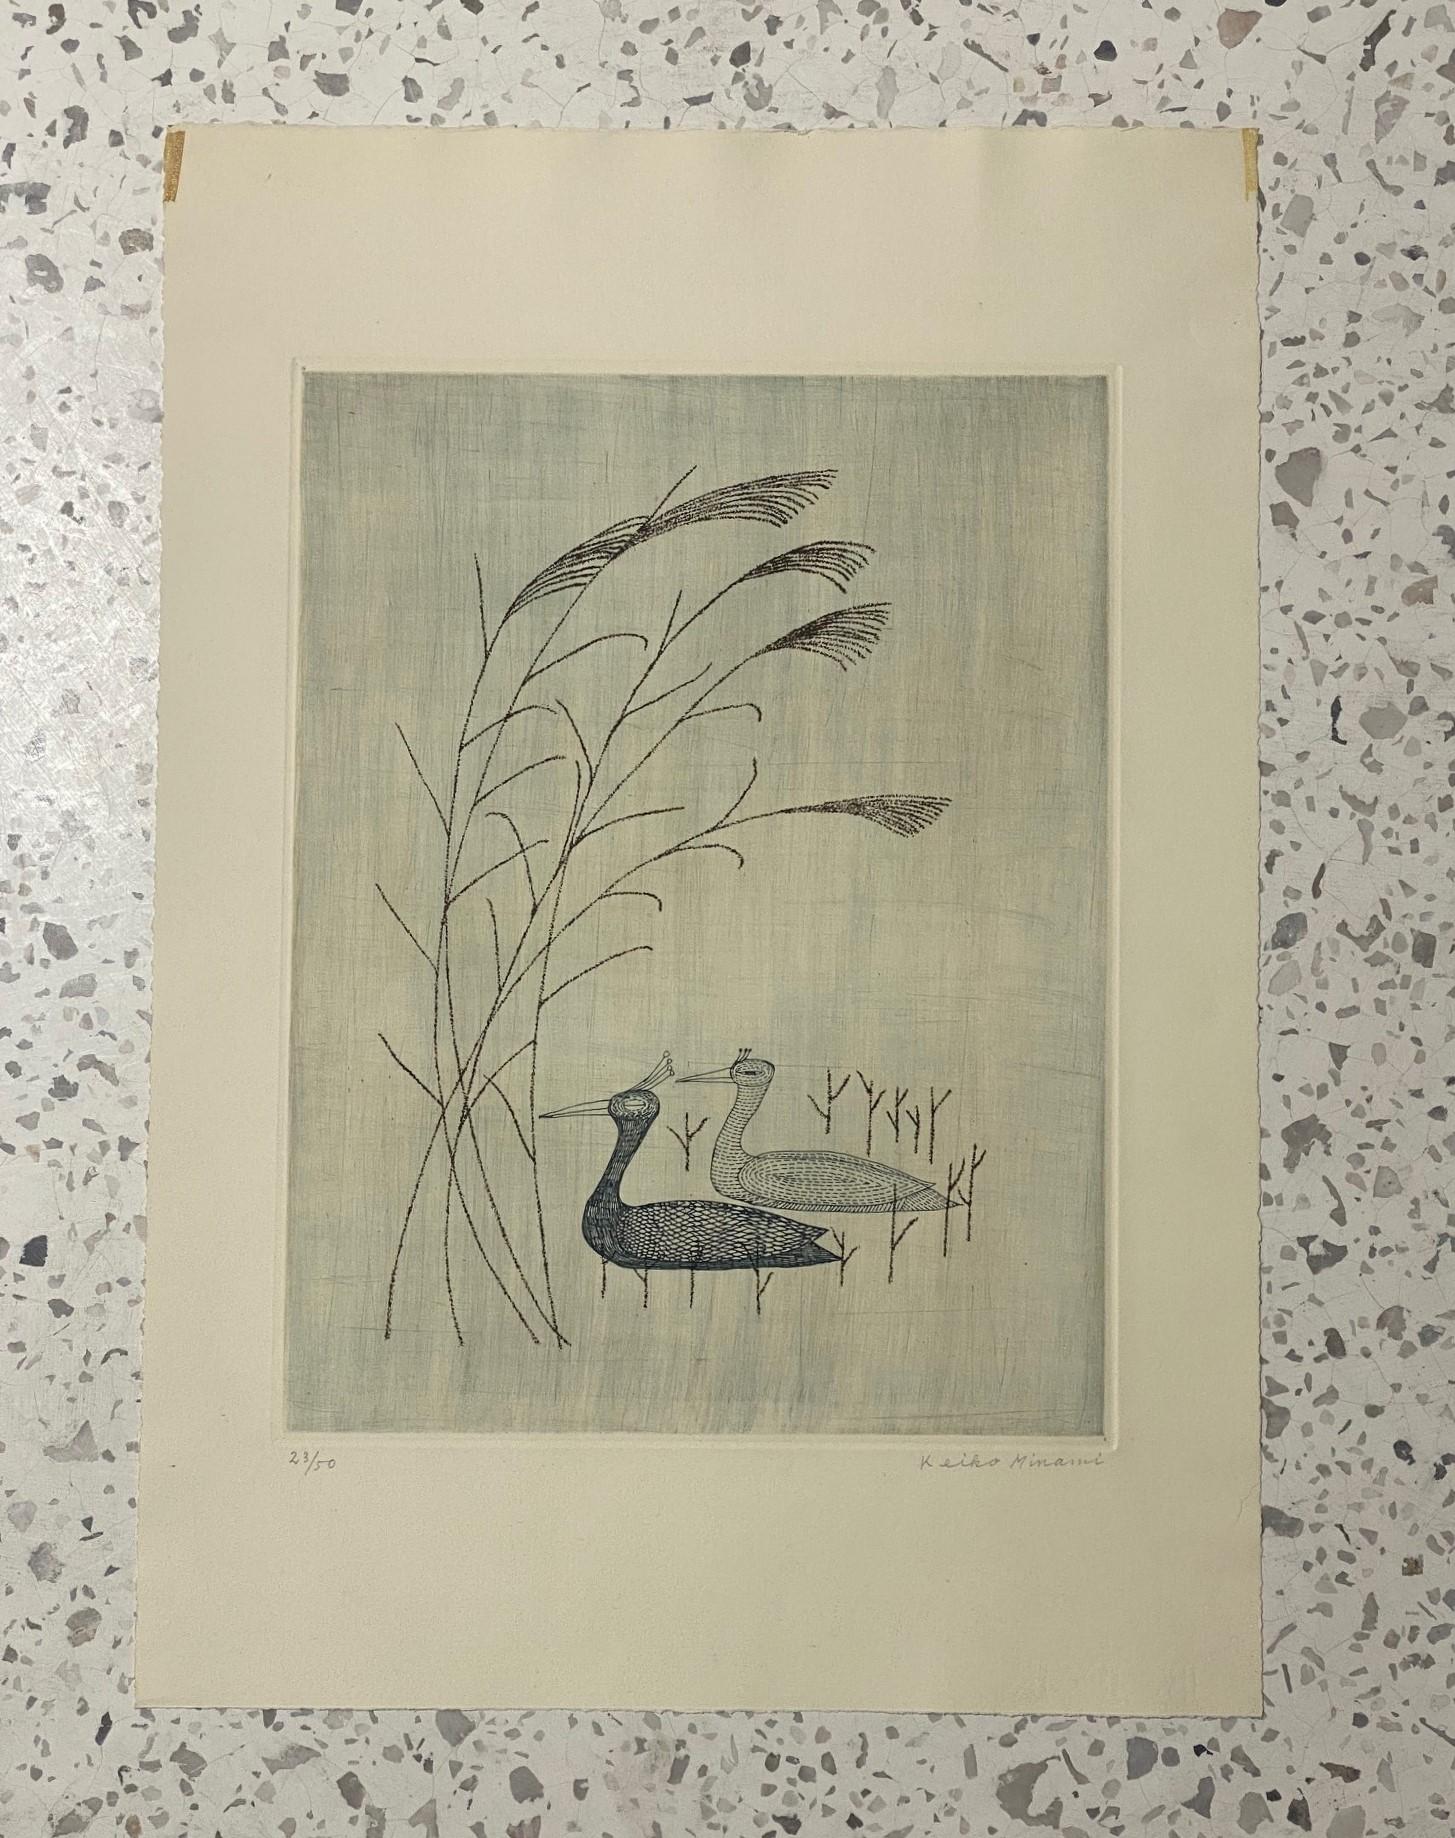 A beautiful and rather whimsical etching by famed Japanese artist Keiko Minami who was known for her pictograph-like aquatints/etchings with a playful, childlike aesthetic. This work features a pair of birds - perhaps herons - sitting serenely in a